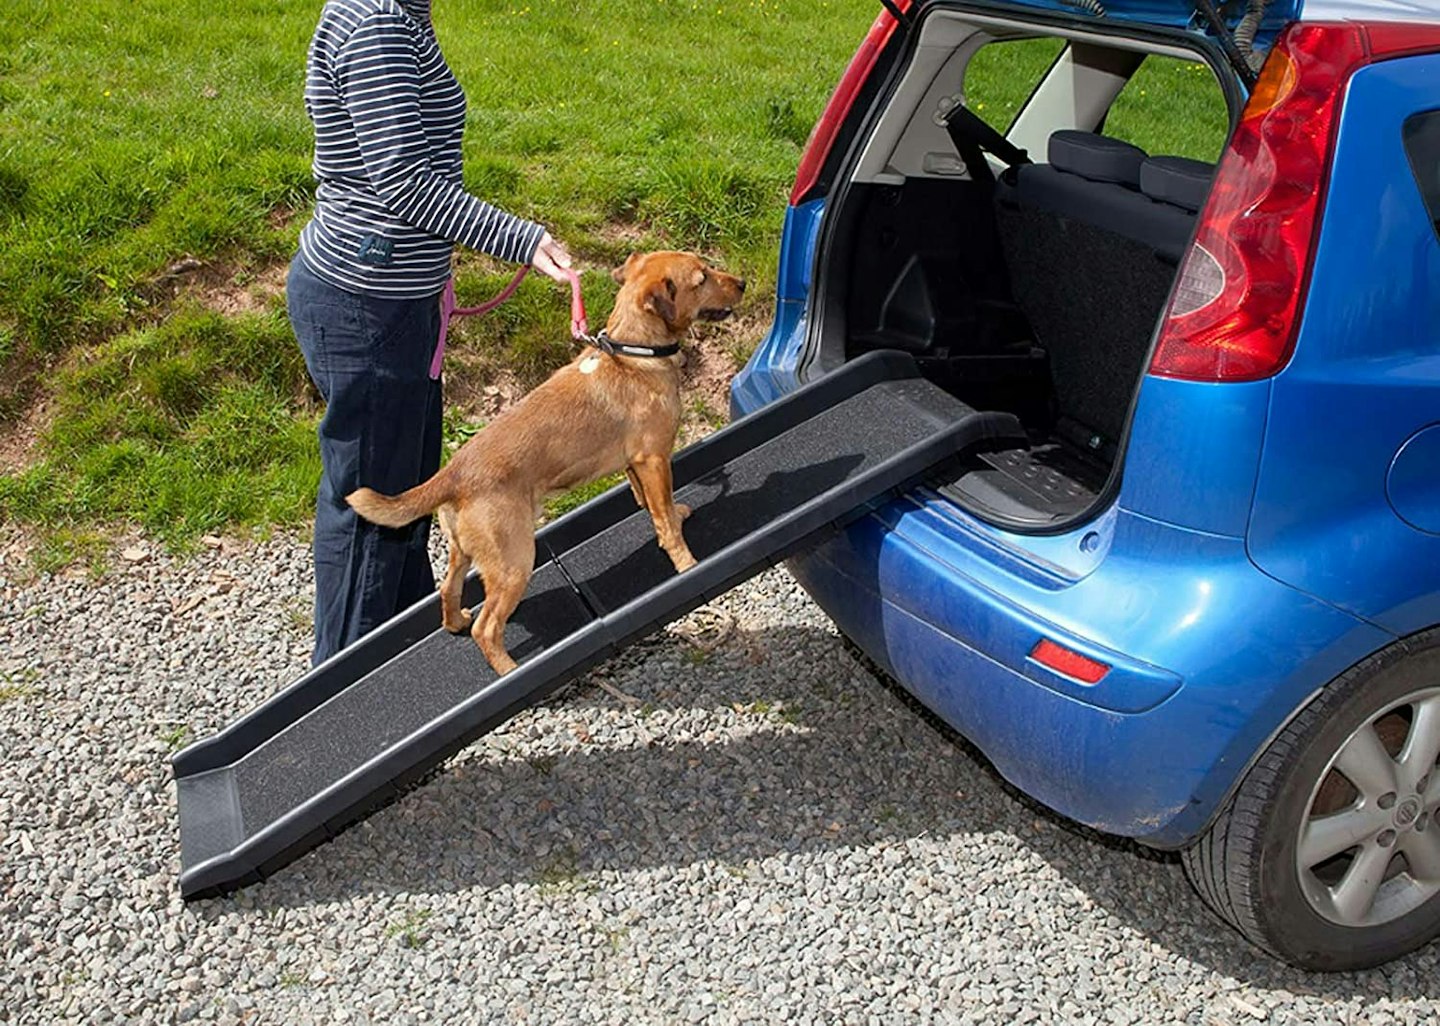 Easipet Pet Ramp for Dogs in Plastic, Folding Lightweight and Strong (Black)